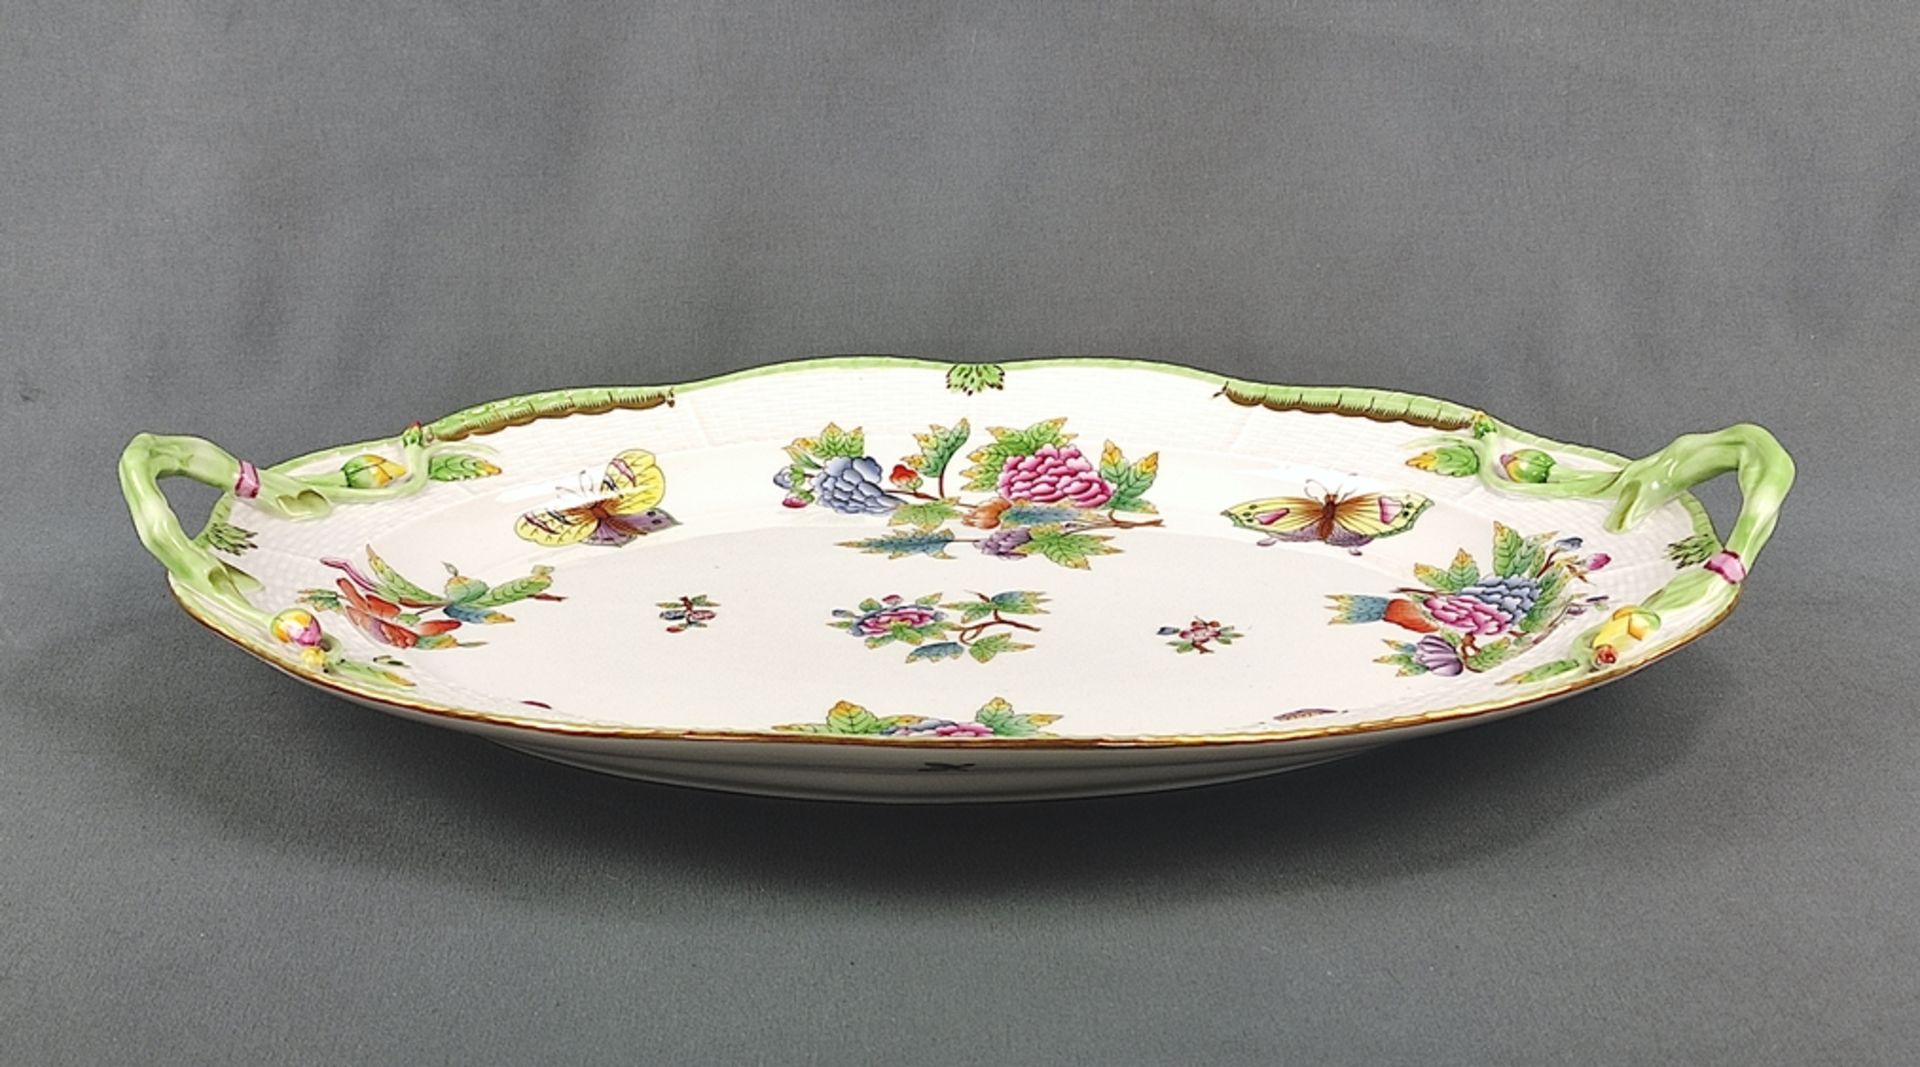 Large serving dish, Herend, Victoria décor, polychrome painting with blossoms and butterflies and g - Image 2 of 3